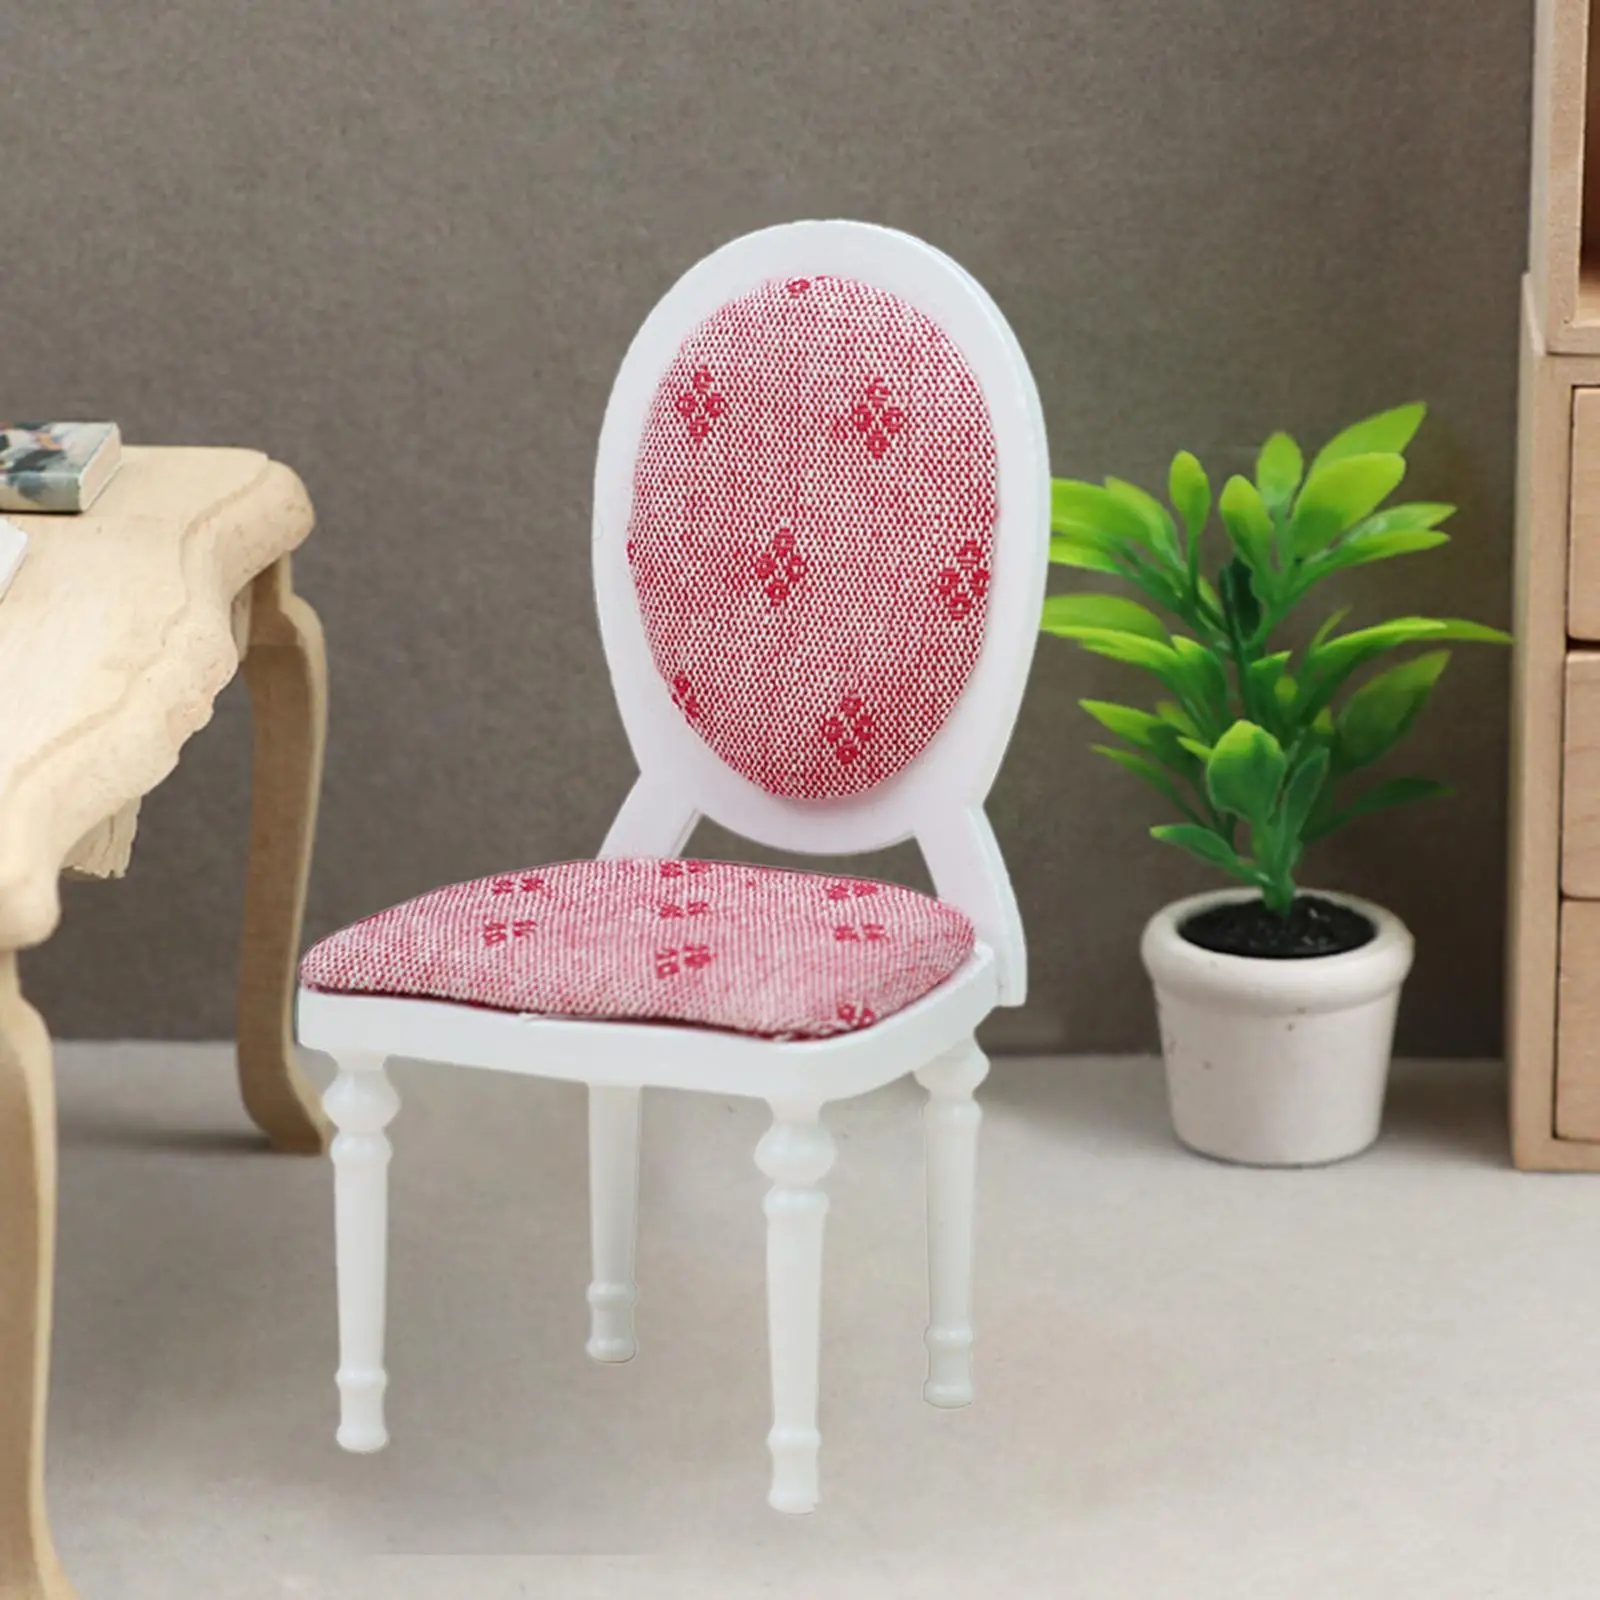 Mini Dollhouse Chair Furniture Kitchen Home Bedroom 1:12 Ornaments Scenery Supplies